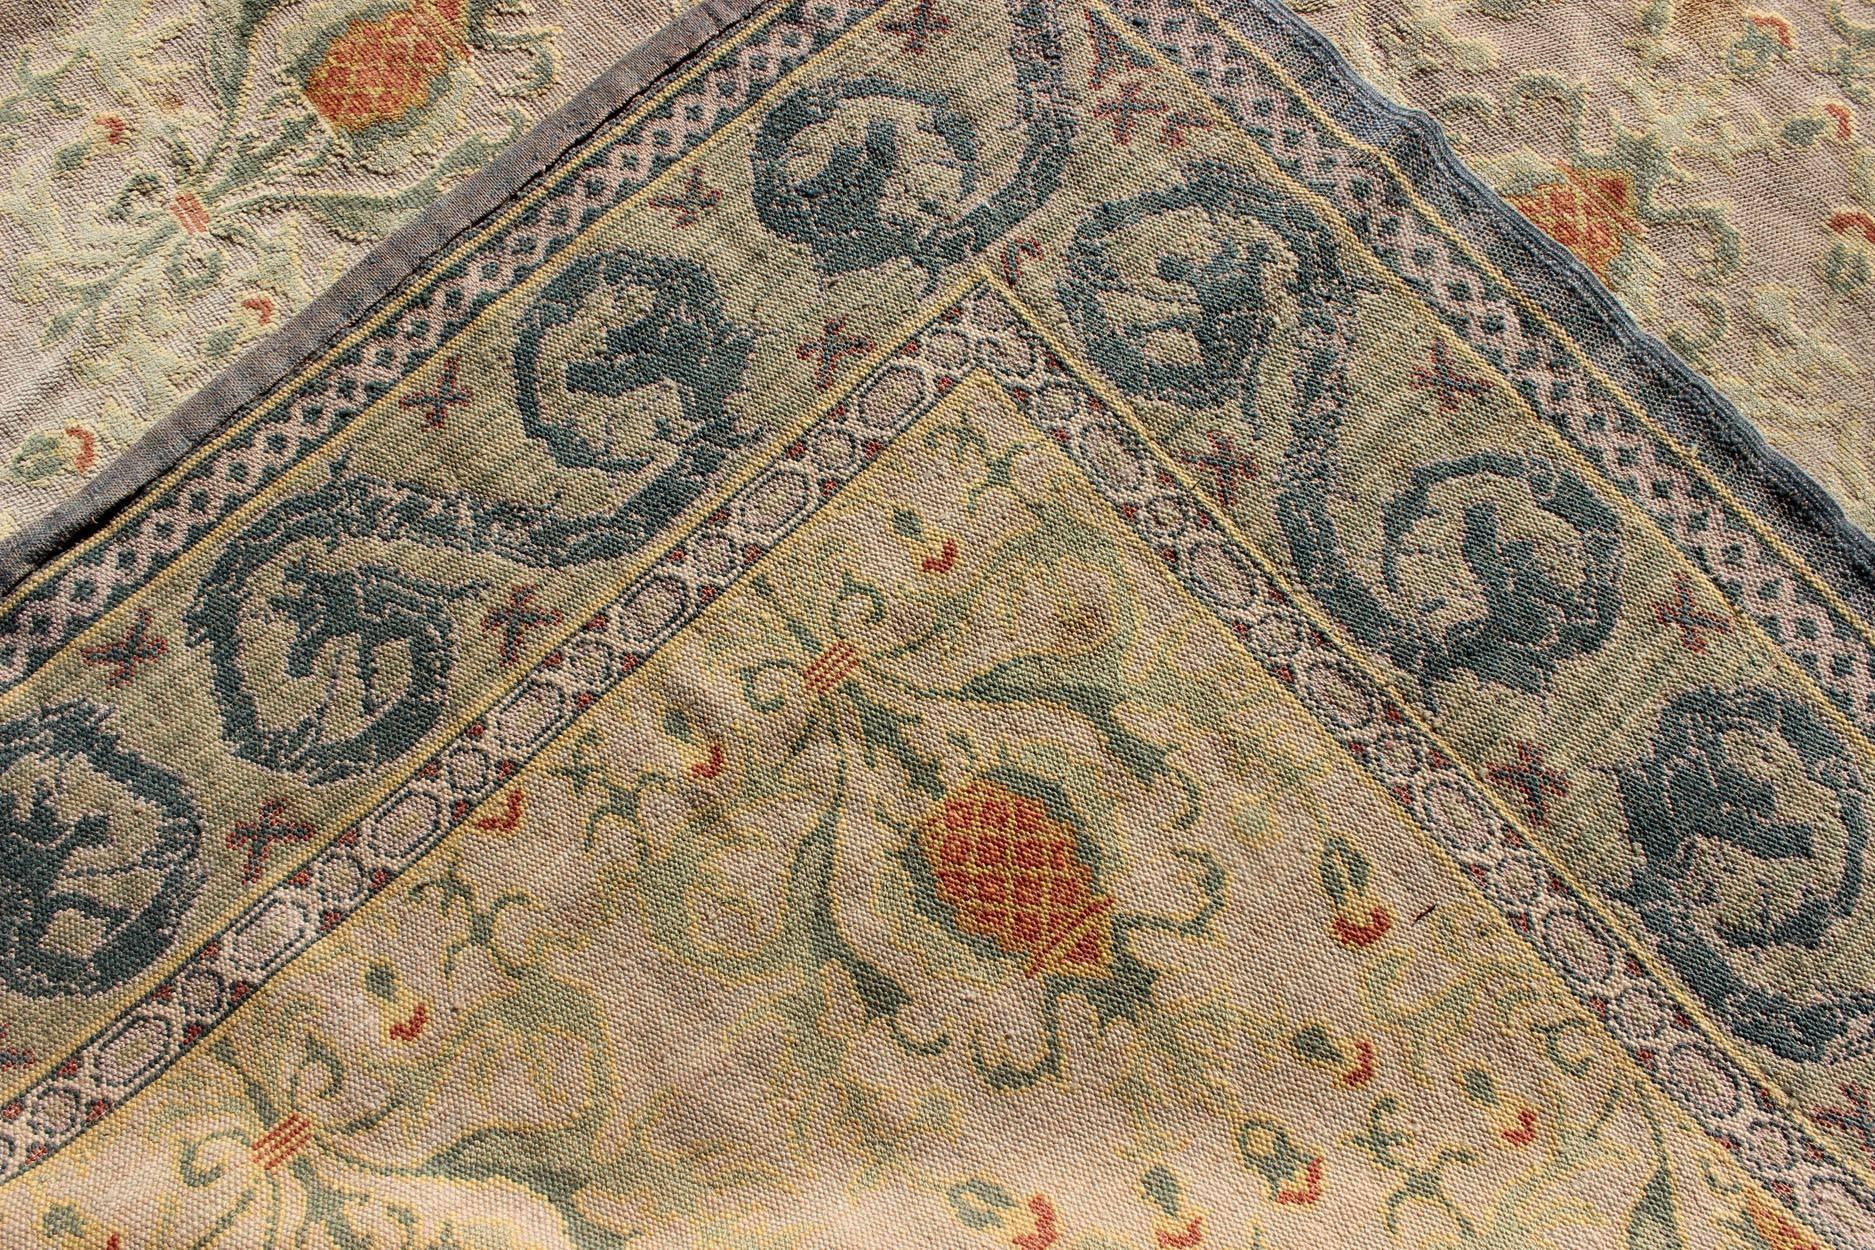 Square Sized Antique Spanish Carpet in Green, Orange and Gray/Blue 1